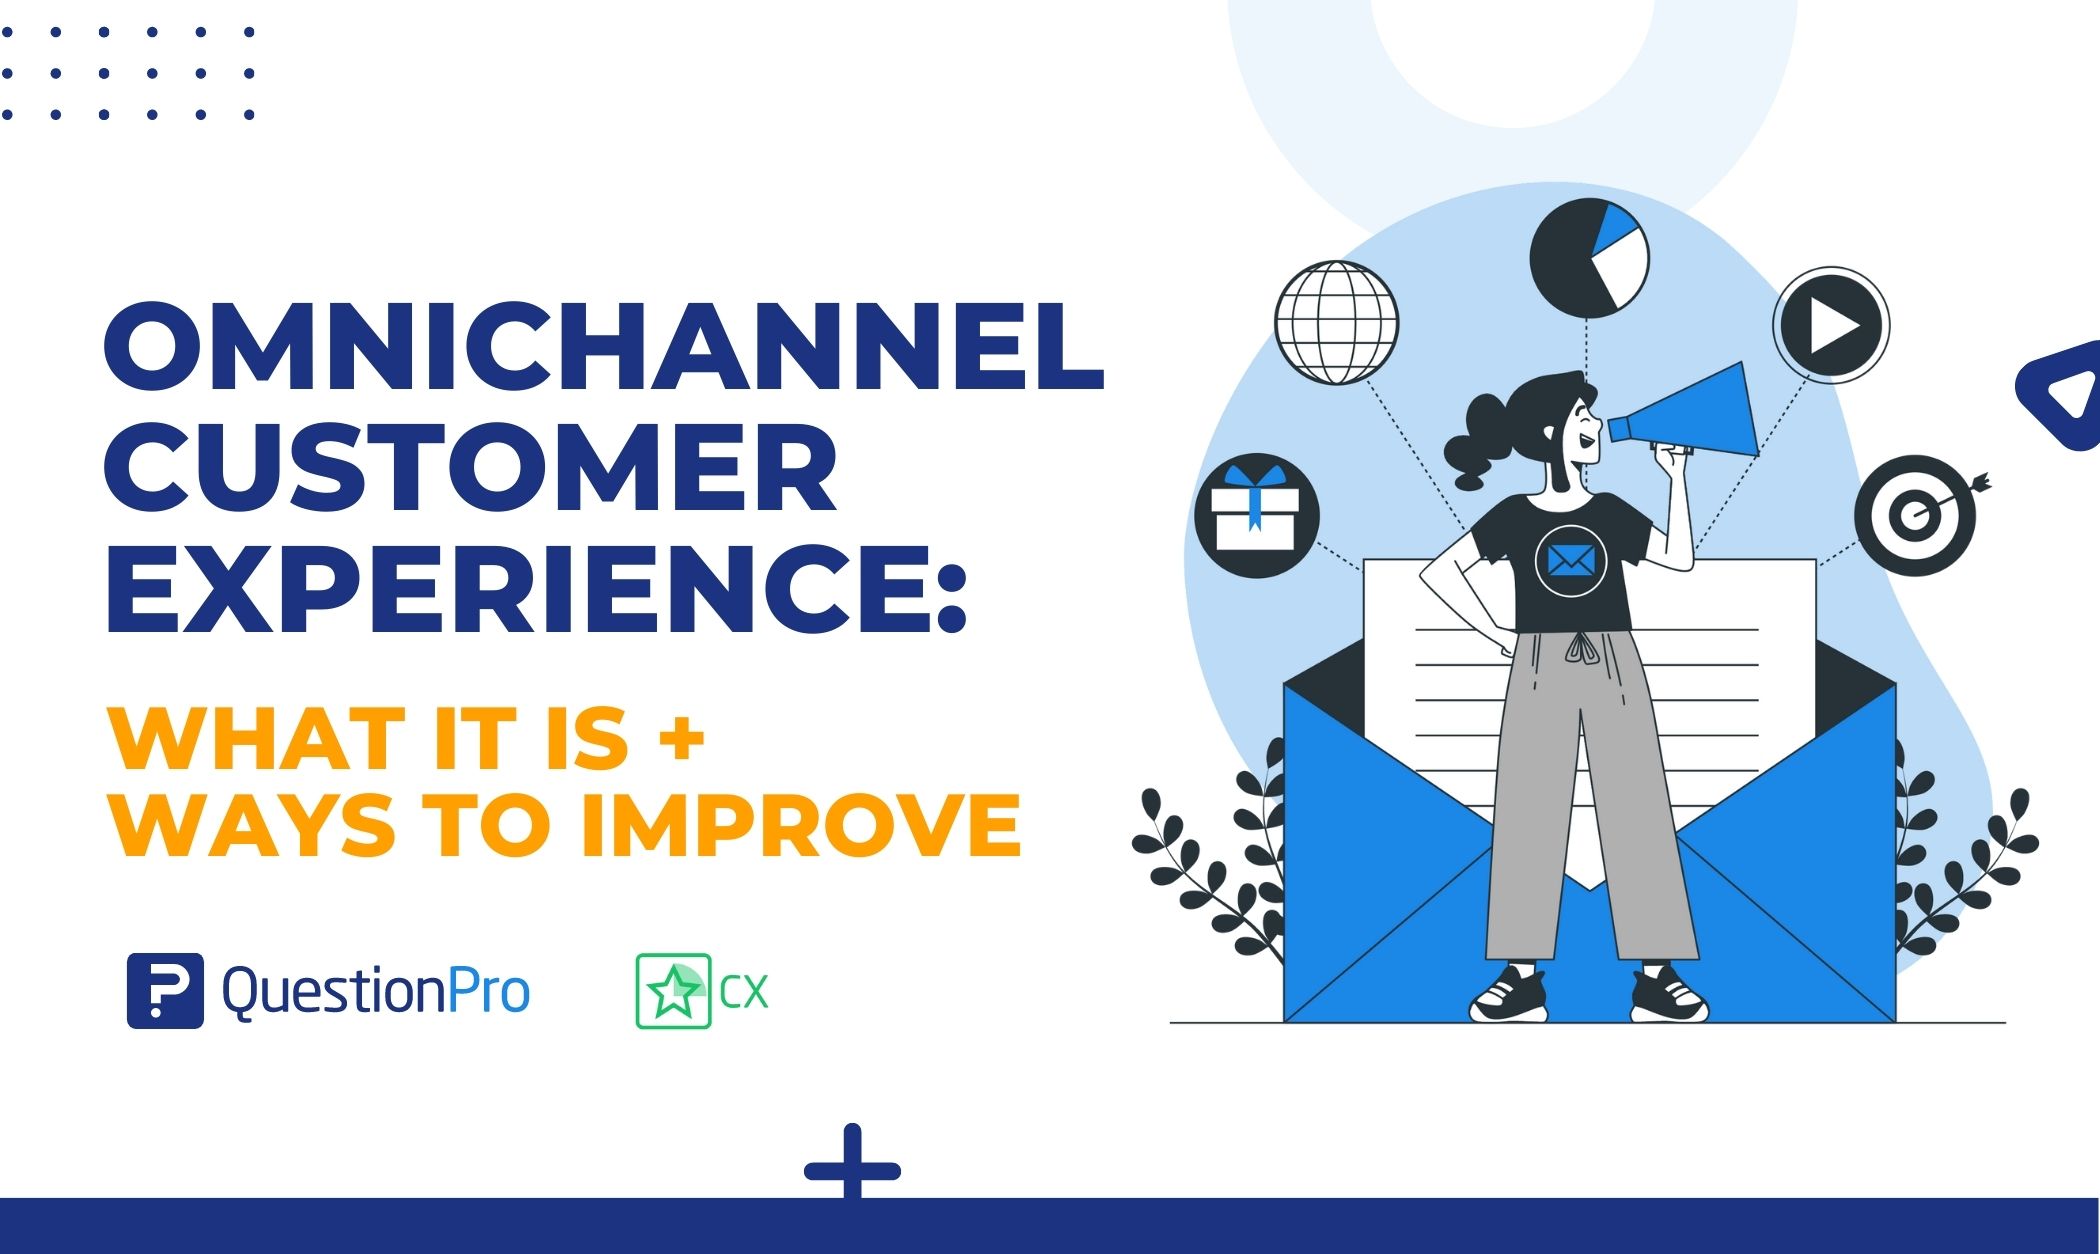 Omnichannel customer experience is an engagement tool for companies. It improves performance by increasing customer loyalty and satisfaction.